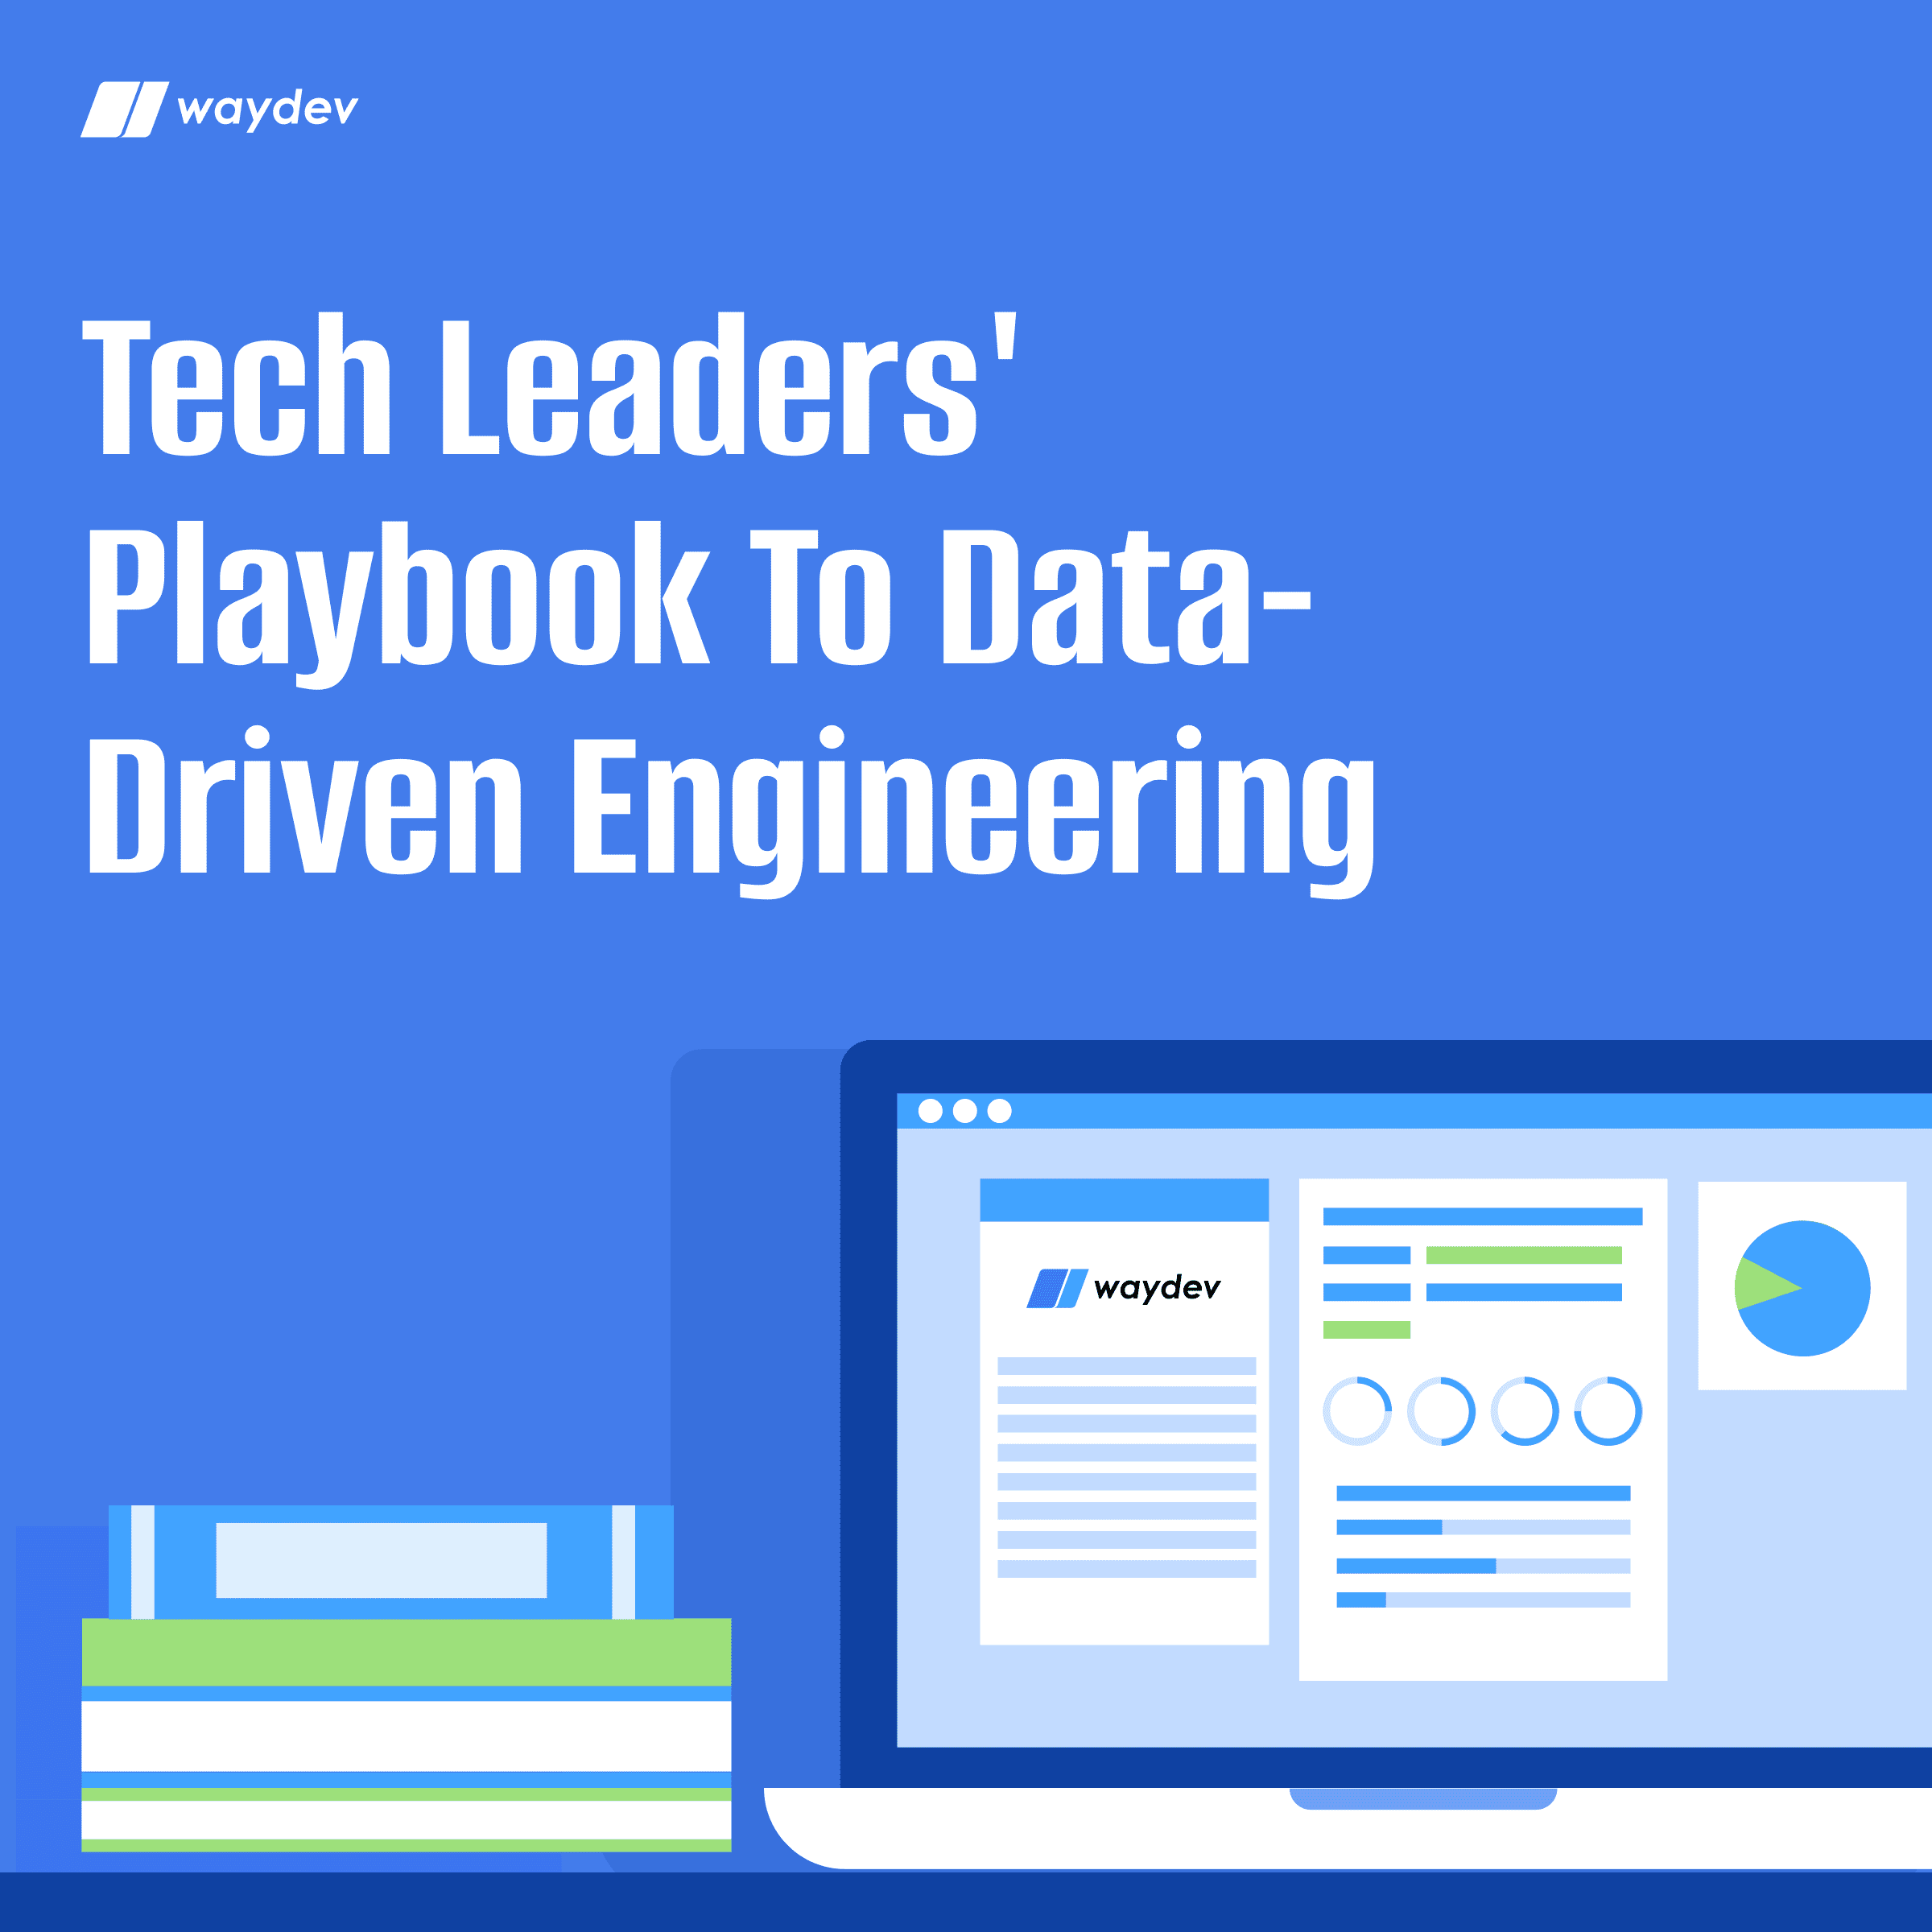 Tech Leaders' Playbook to Data-Driven Engineering